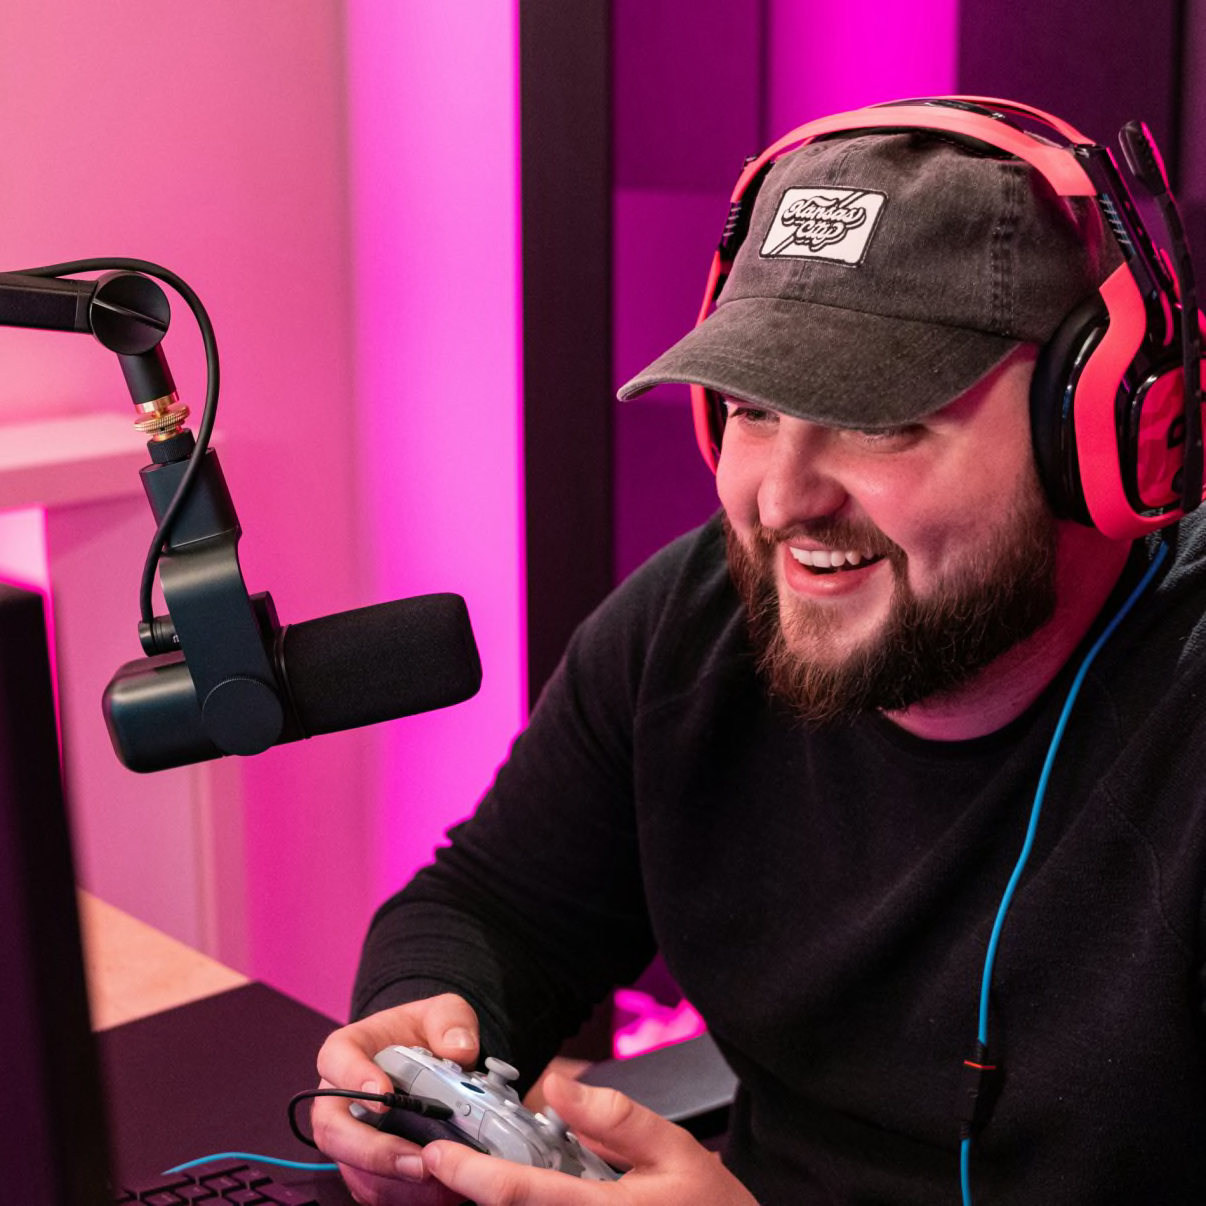 legiqn streaming with xlr broadcast microphone